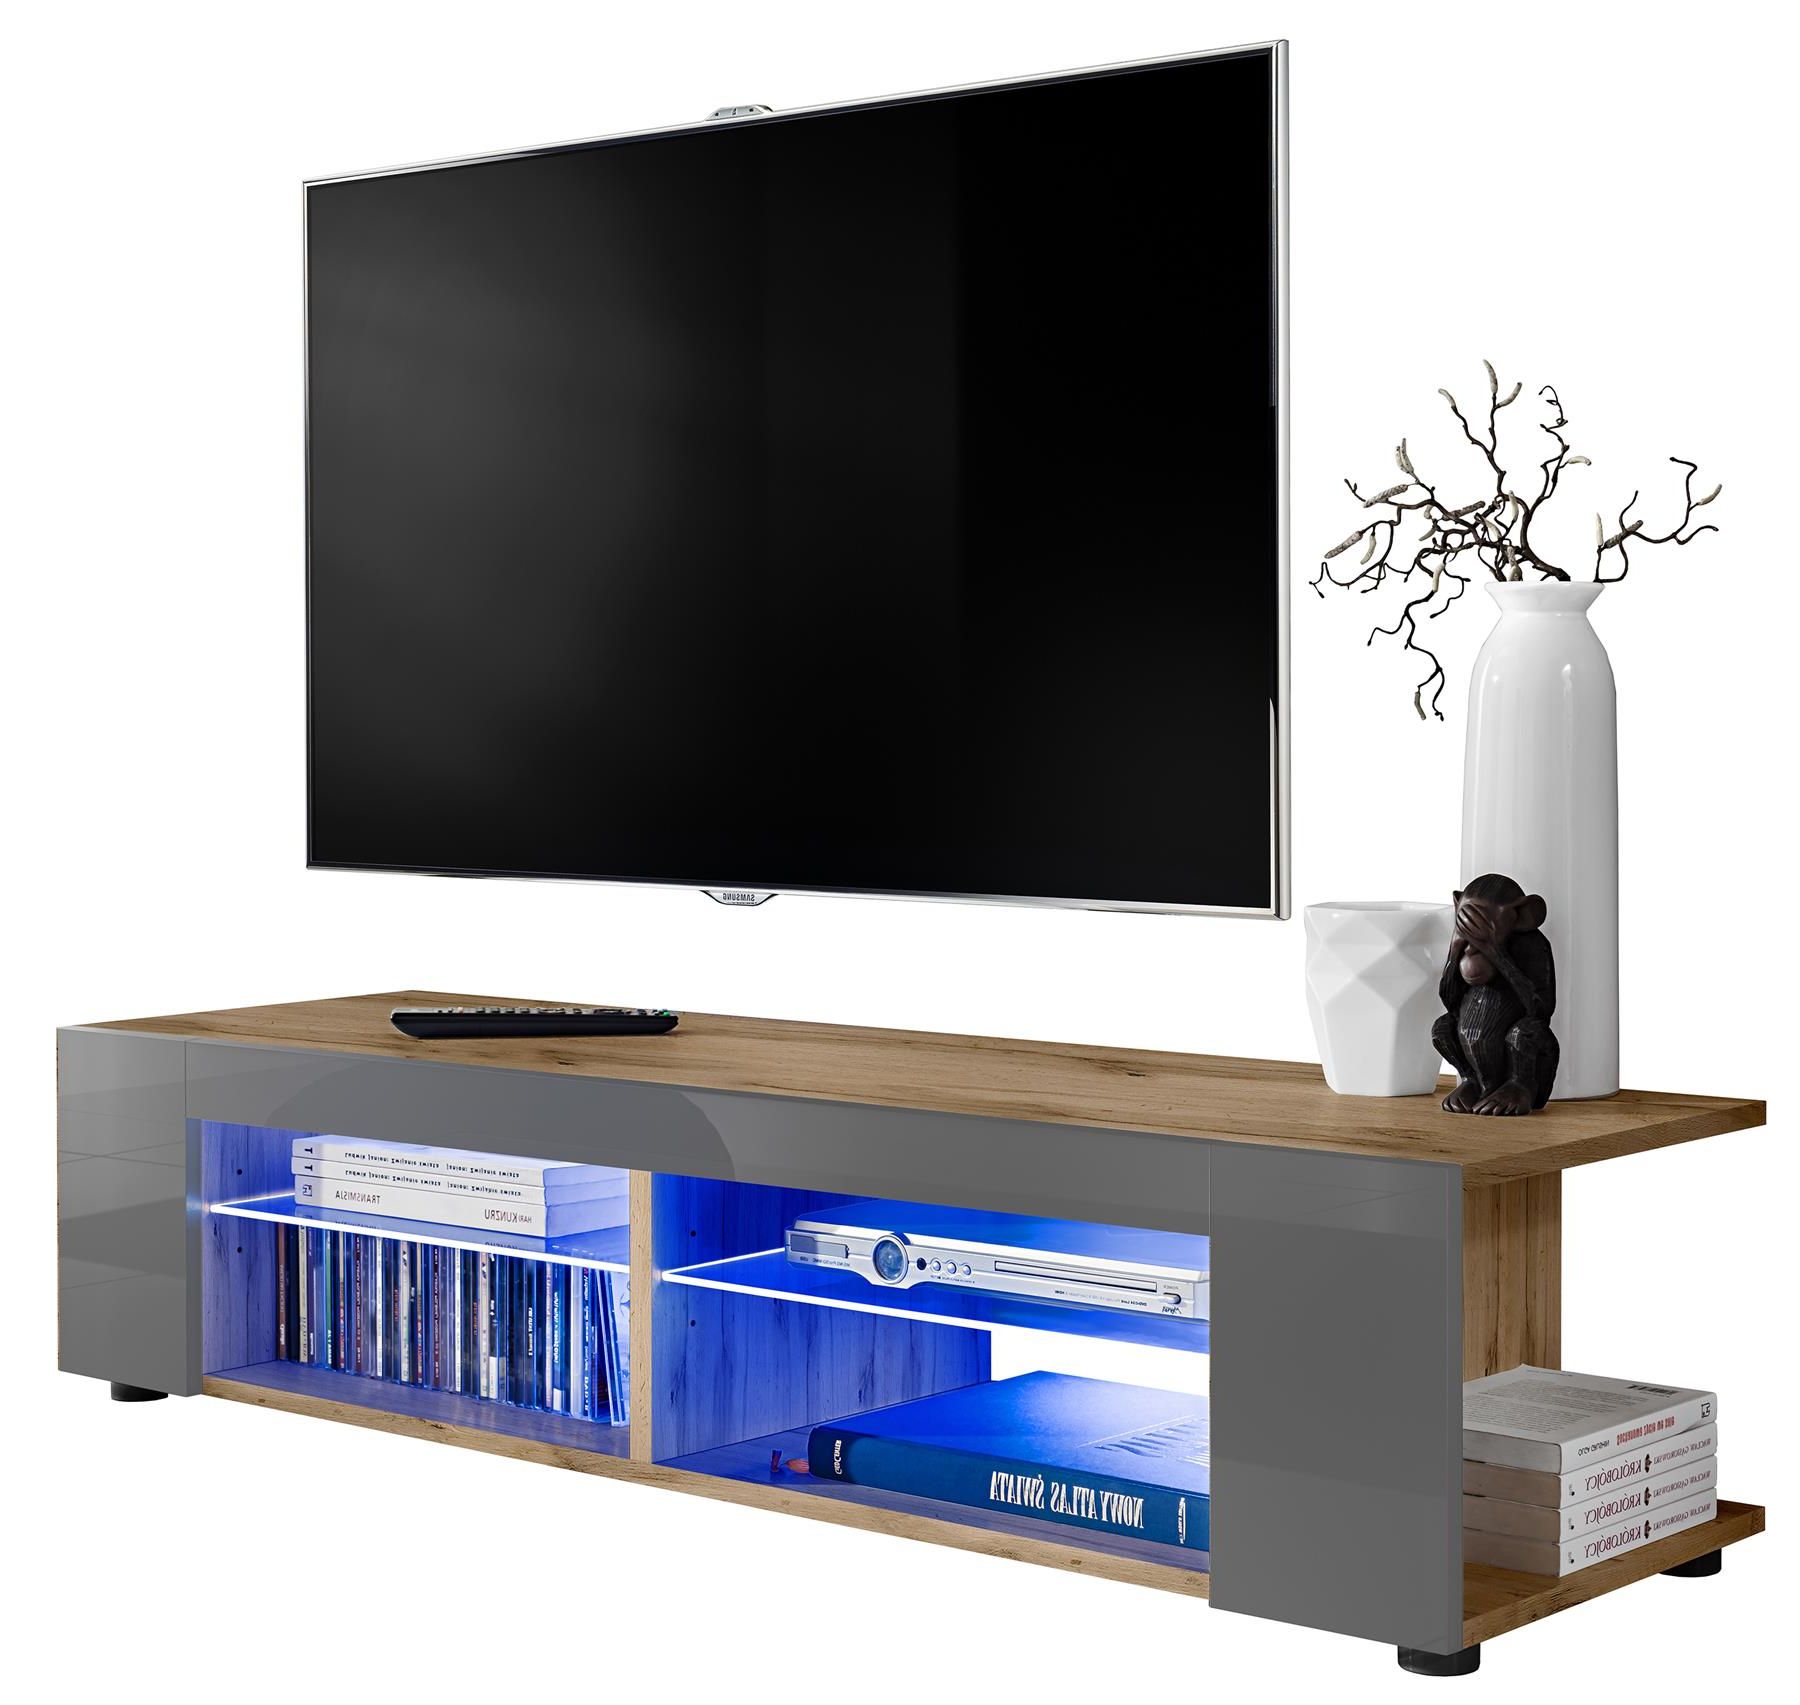 Tv Stand Cabinet Led Shelf Entertainment Media Center Within Zimtown Modern Tv Stands High Gloss Media Console Cabinet With Led Shelf And Drawers (Gallery 4 of 20)